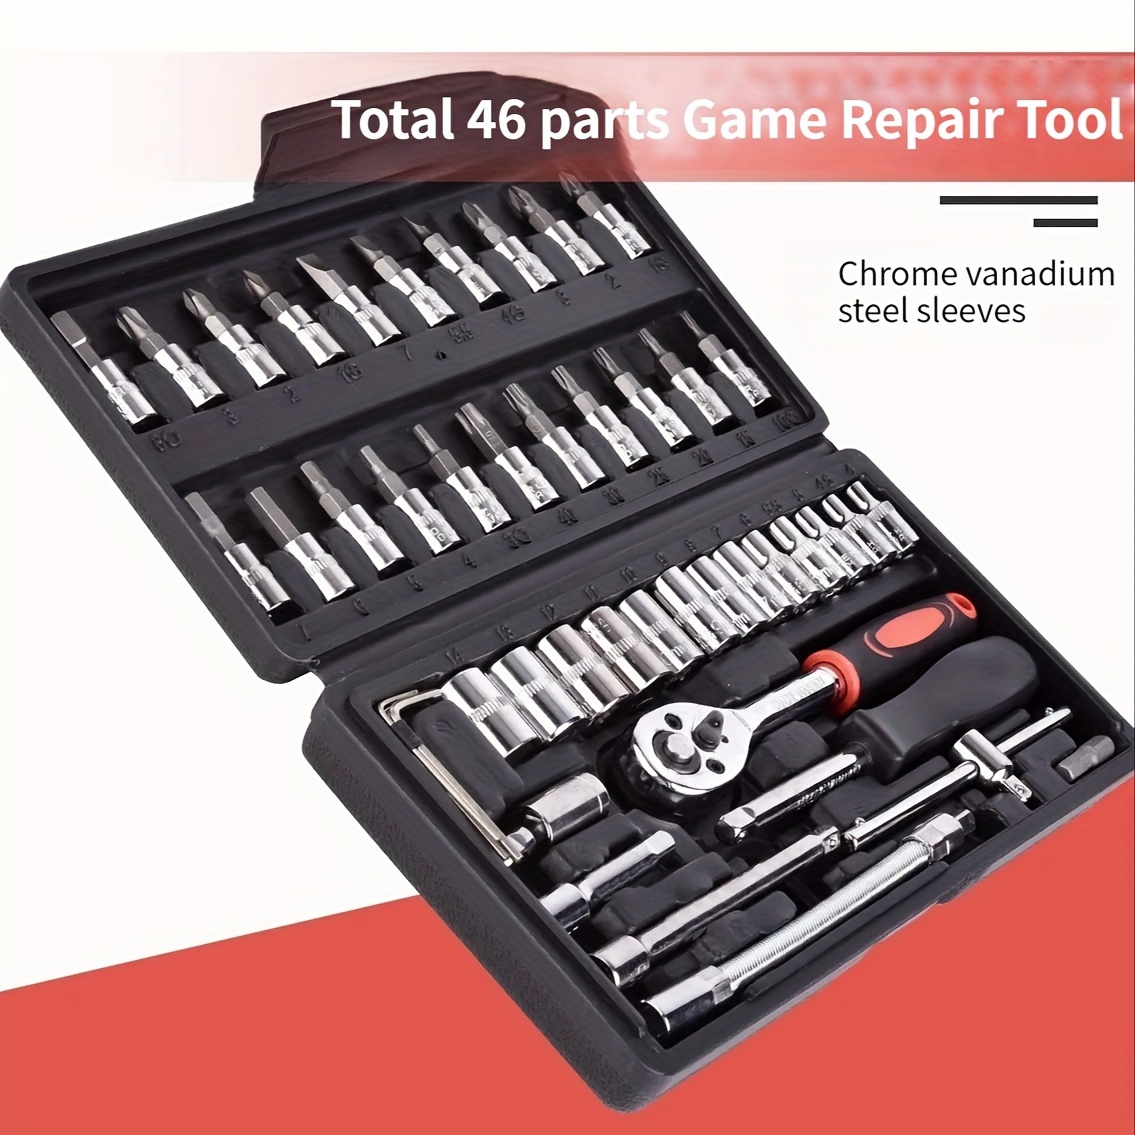 46-Piece 1/4-Inch Drive Socket Wrench Set with Metric Sockets and Extension Bars for Automotive and Home Repairs, Includes Multiple Components, Modern Style with Durable Plastic Case - Chrome Vanadium Steel Sleeves